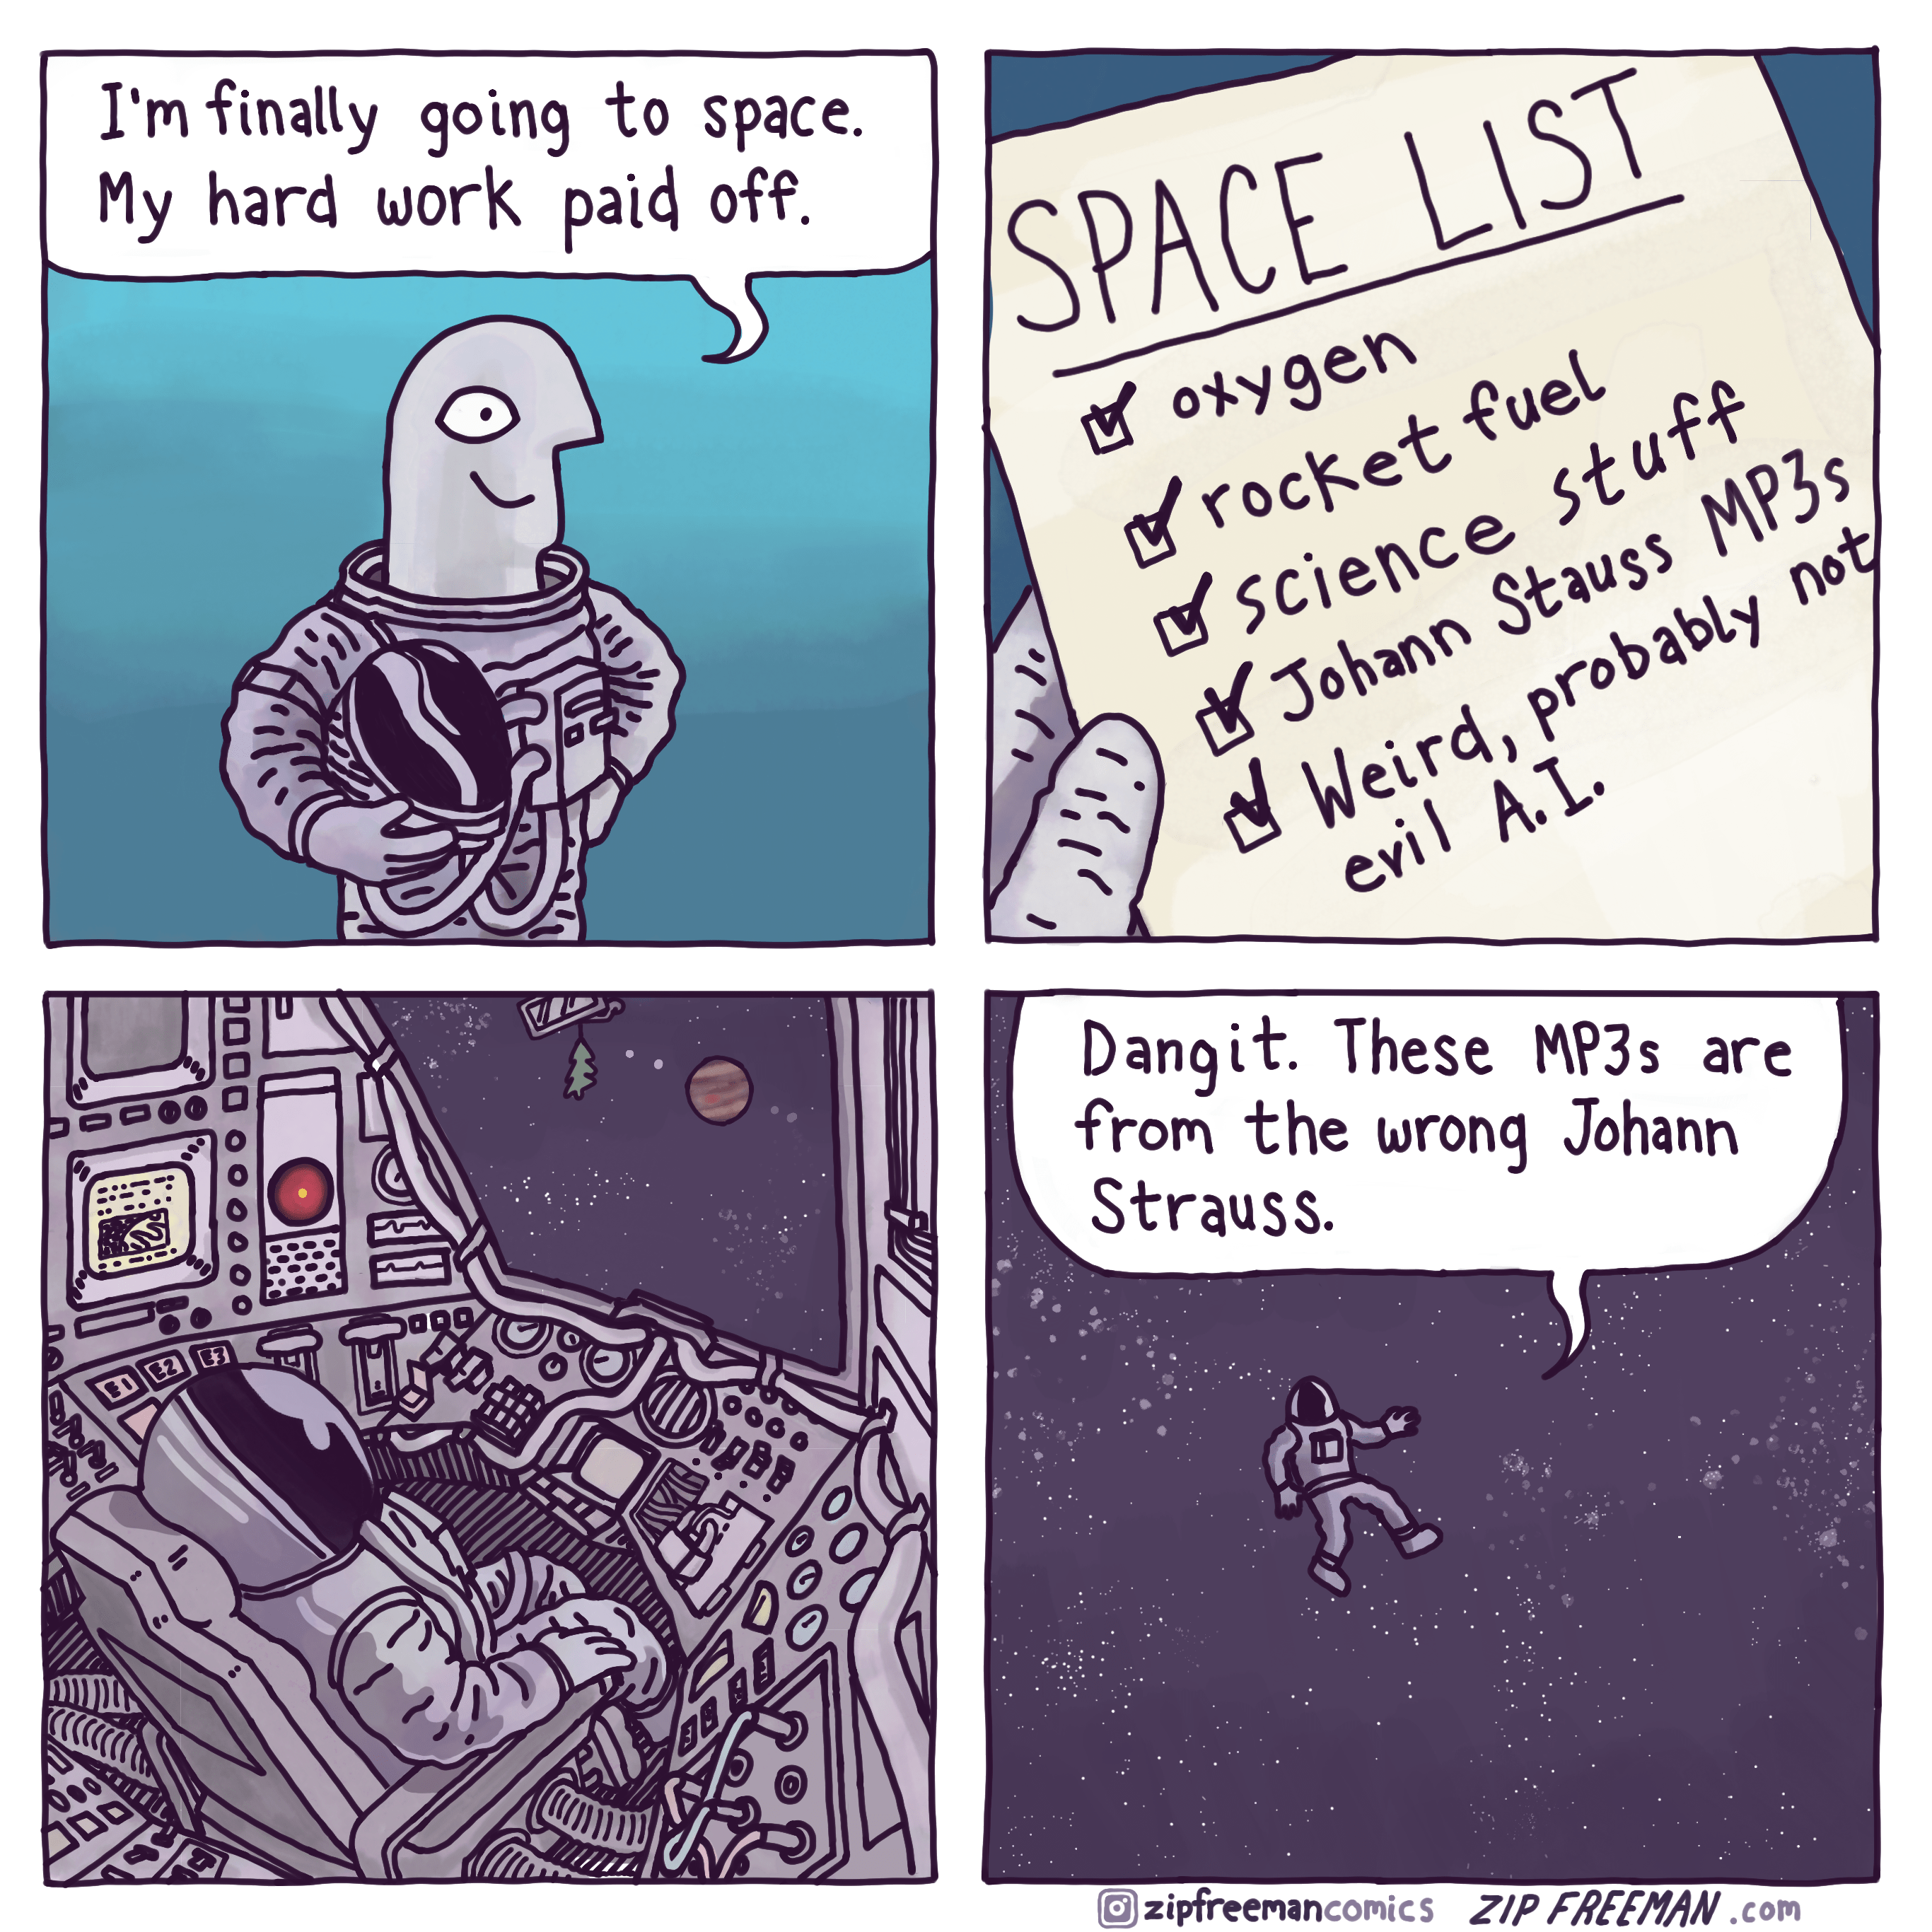 Going to Space